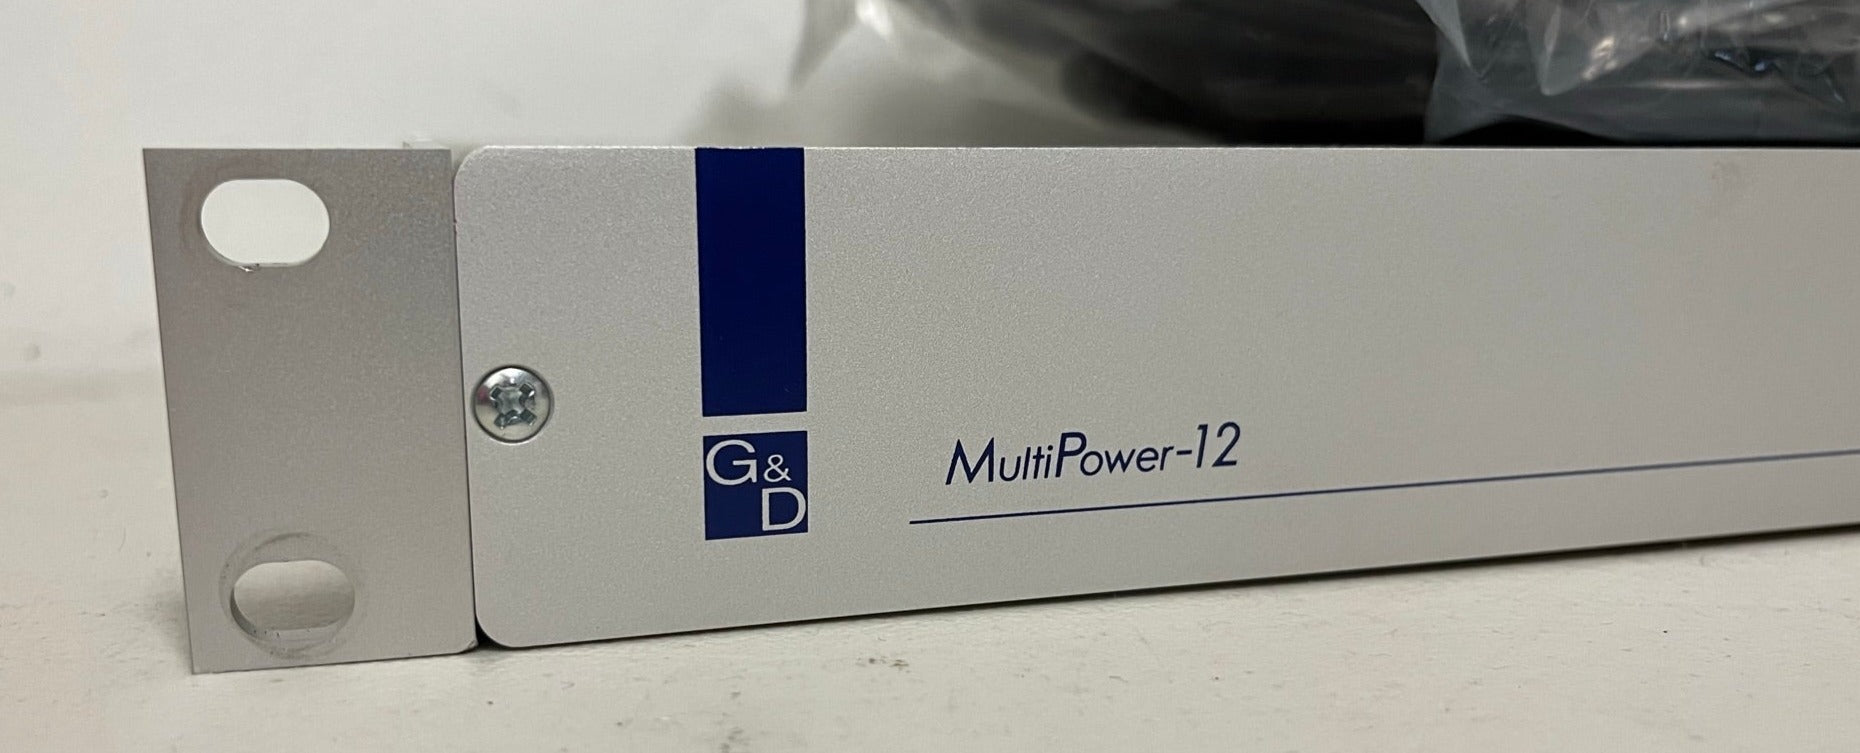 Used G&D MultiPower-12, We Sell Professional Audio Equipment. Audio Systems, Amplifiers, Consoles, Mixers, Electronics, Entertainment, Sound, Live.